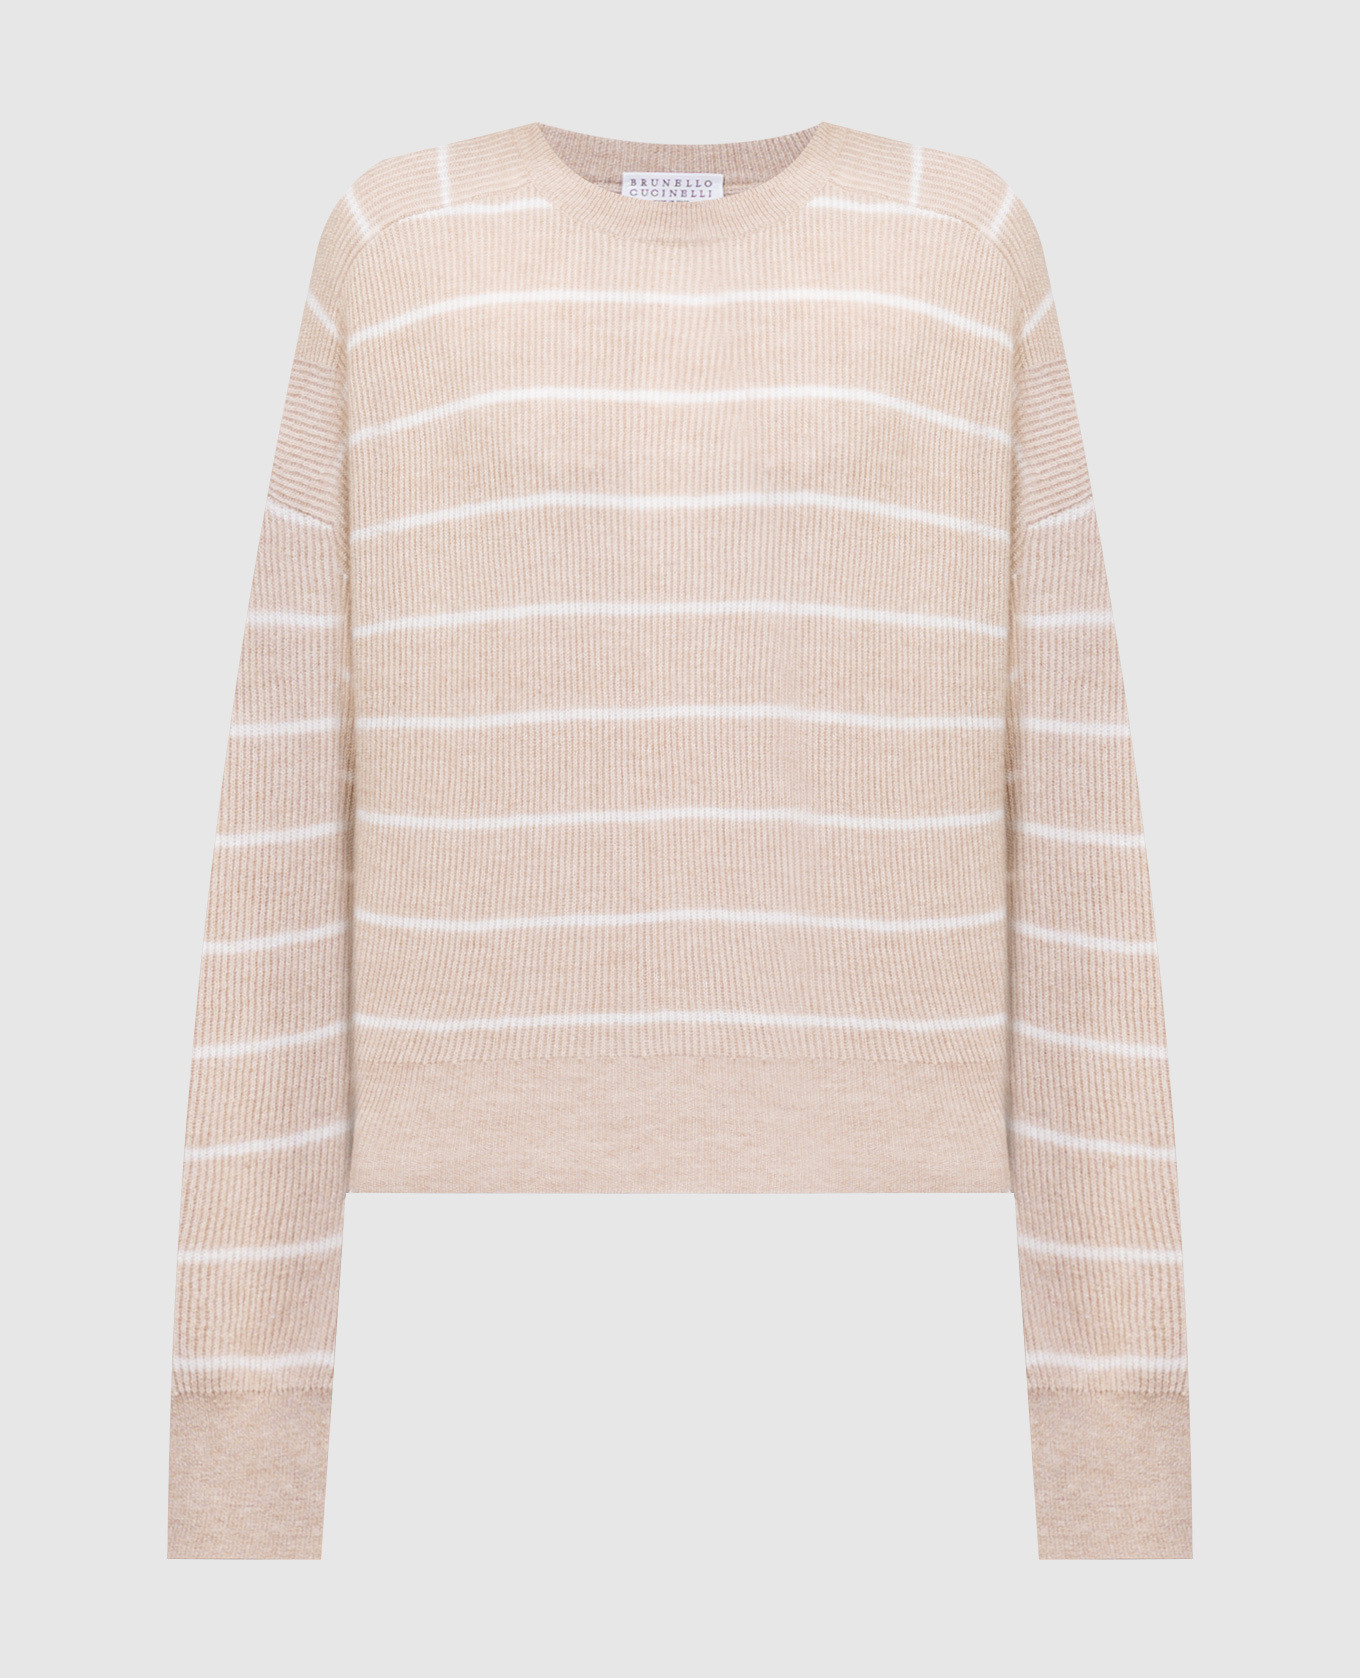 Beige striped sweater with monil chain